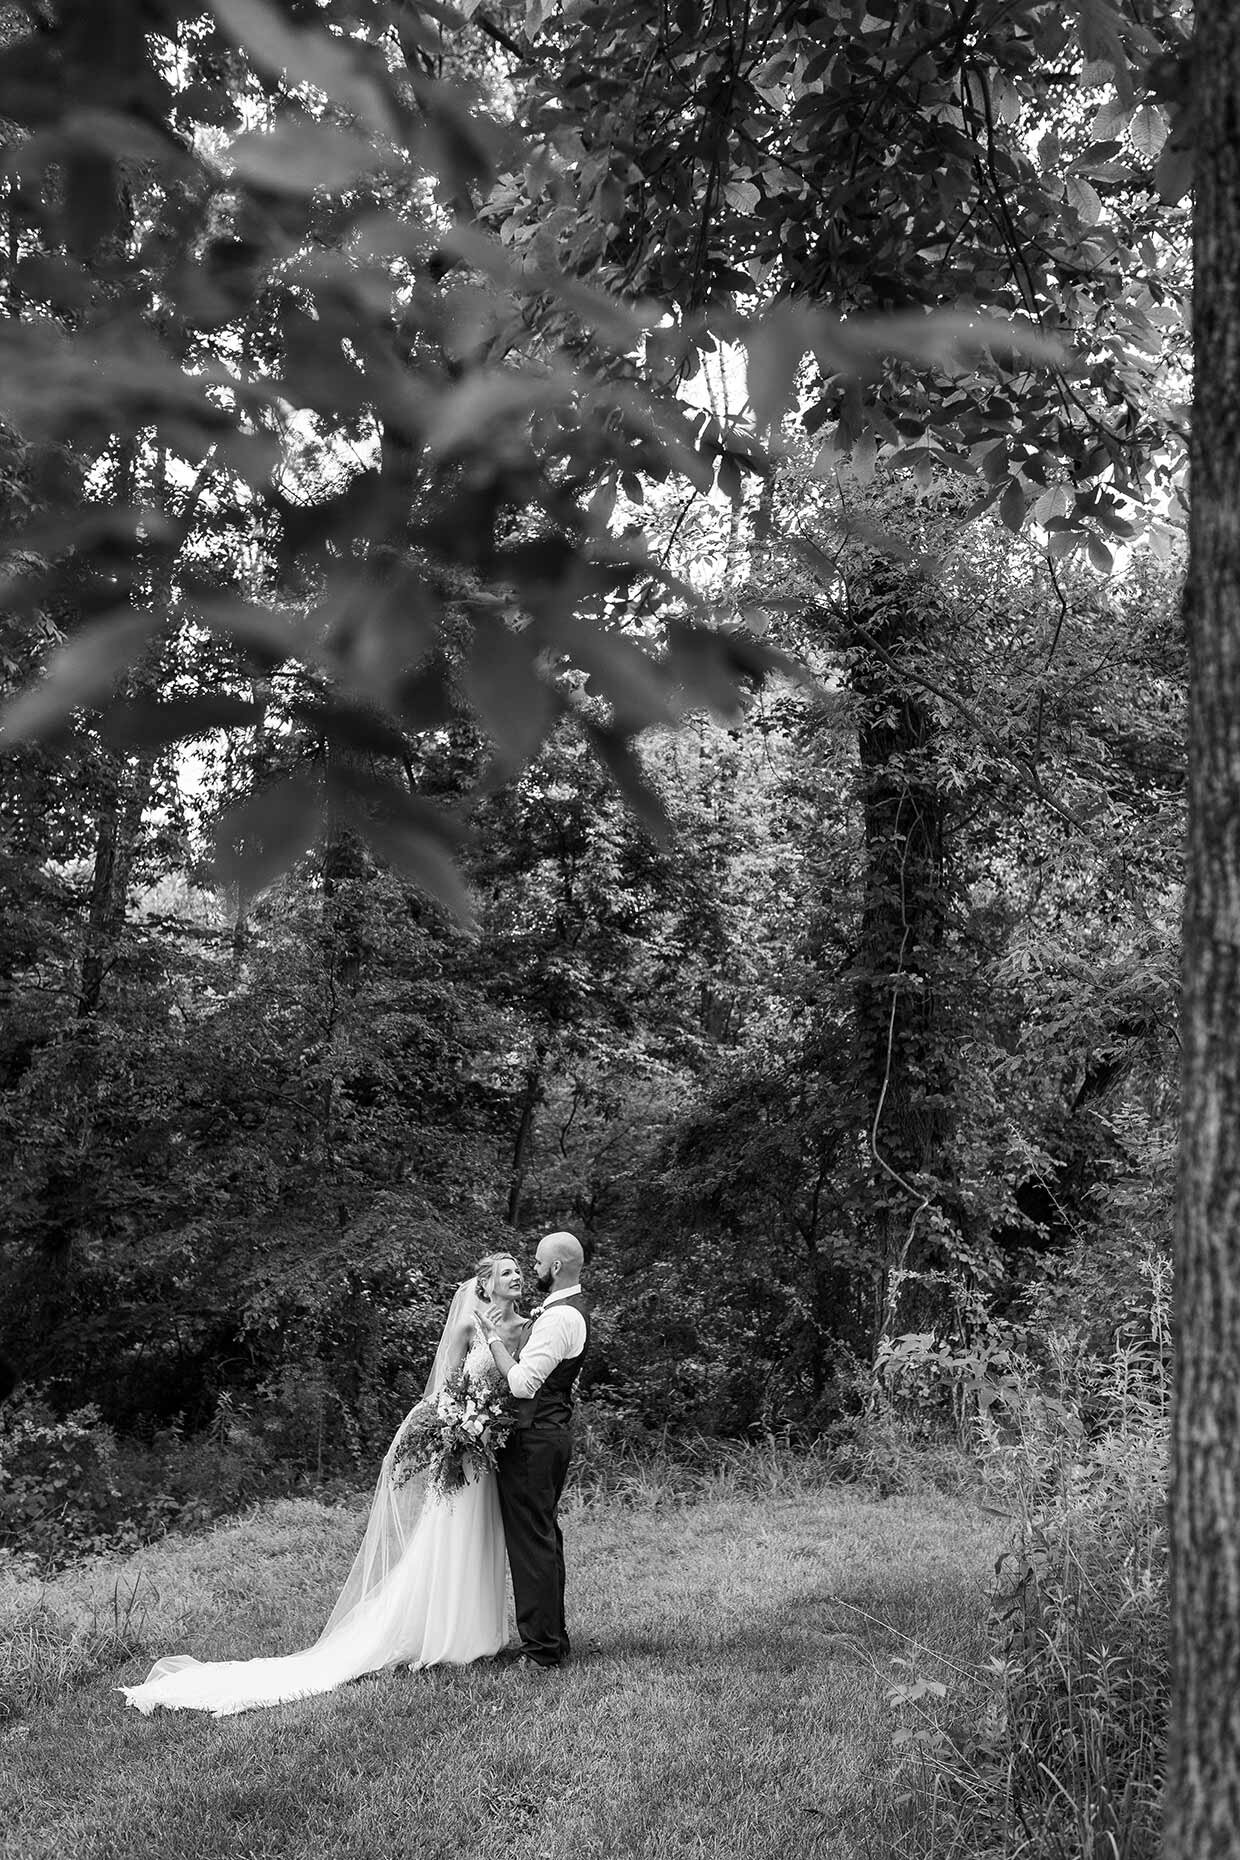 Bride and Groom in a forest in black and white 